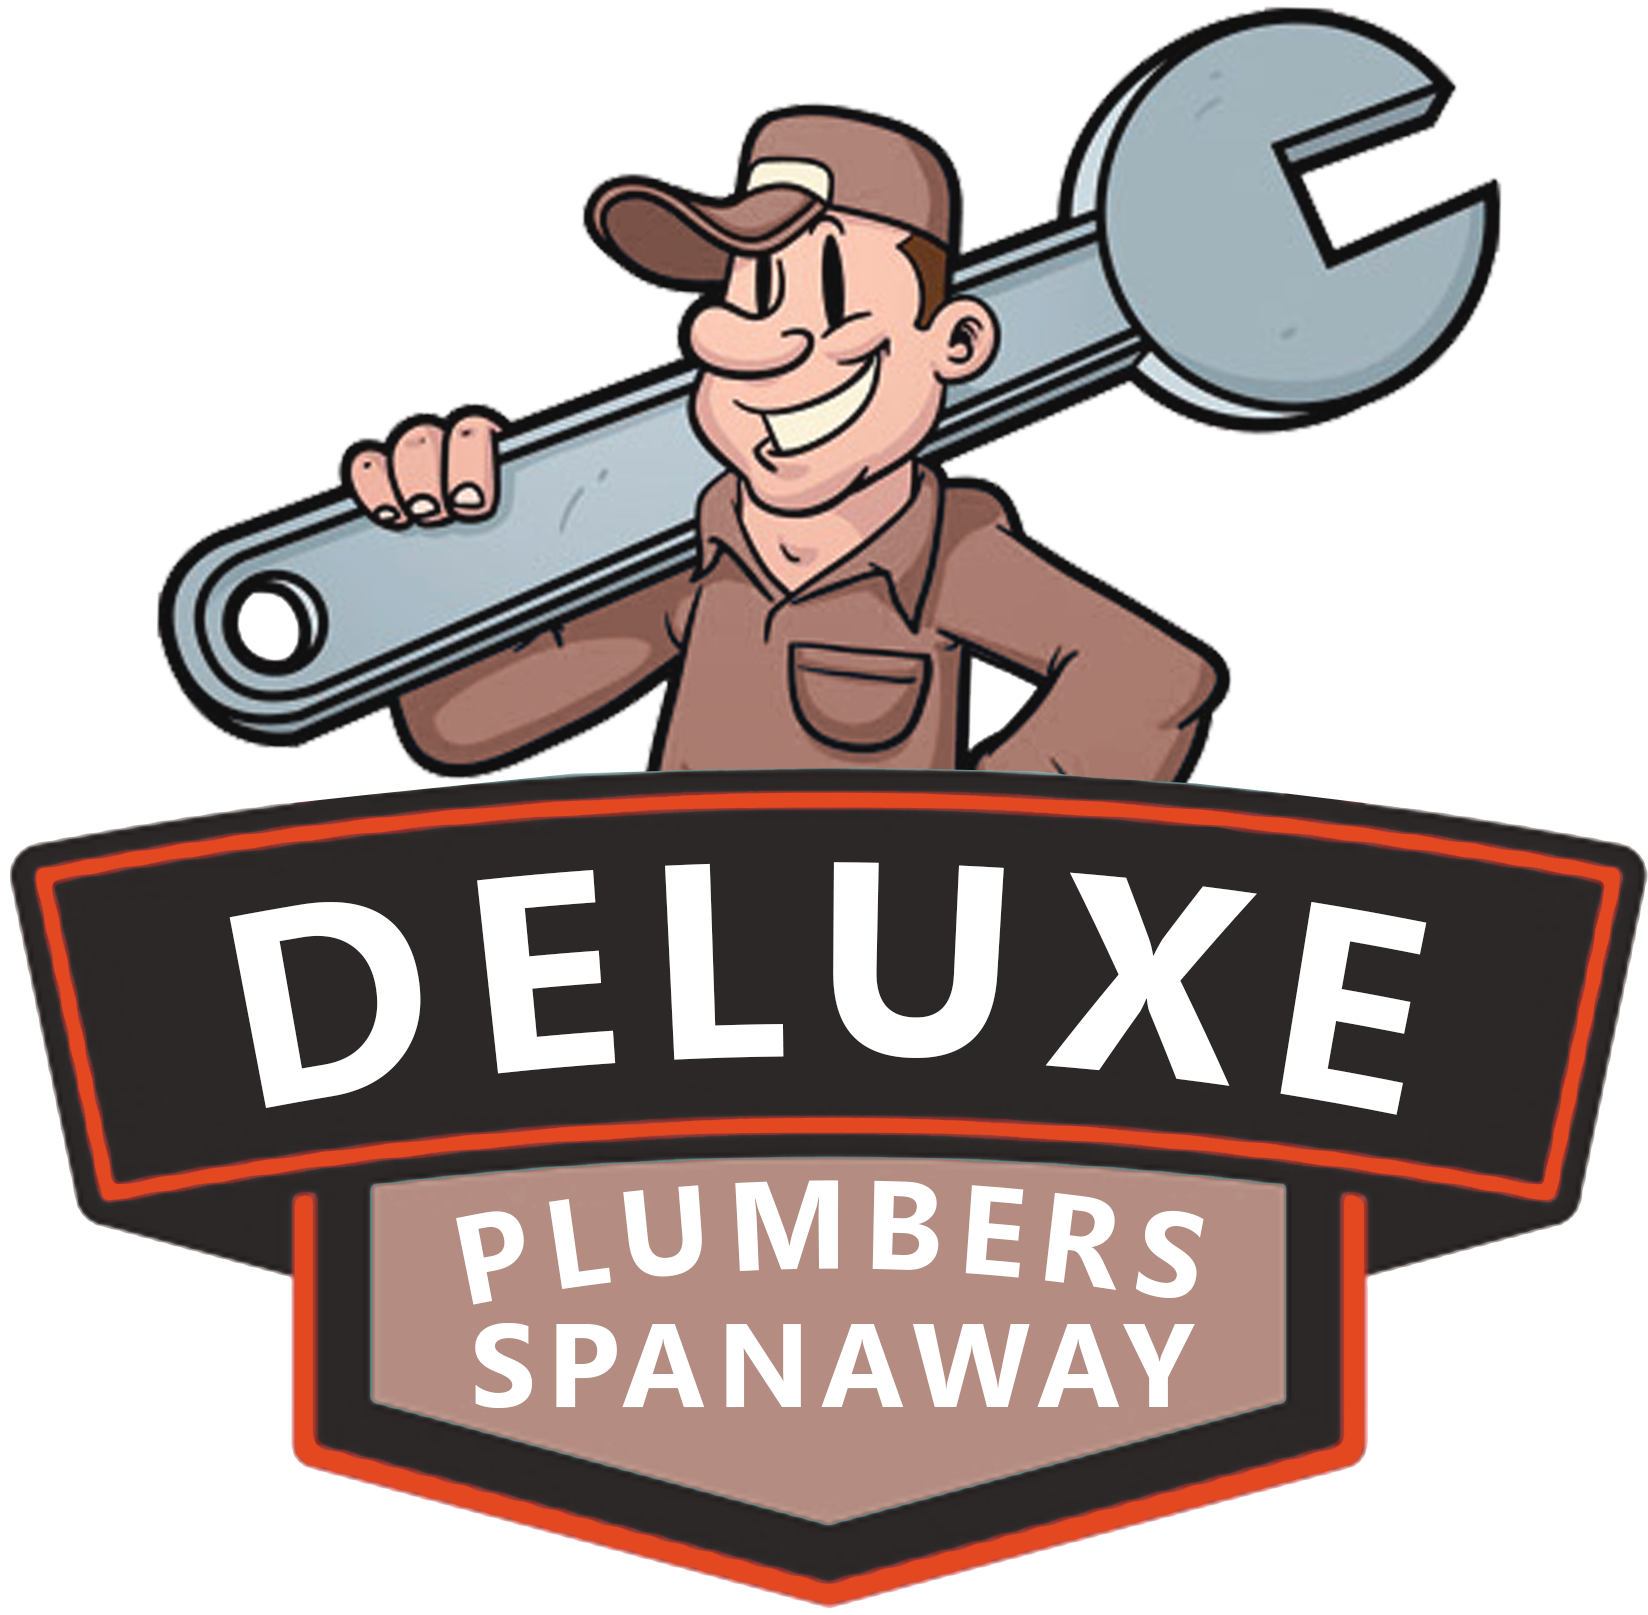 Hire our plumbers hours. Plumber clipart plumbing service